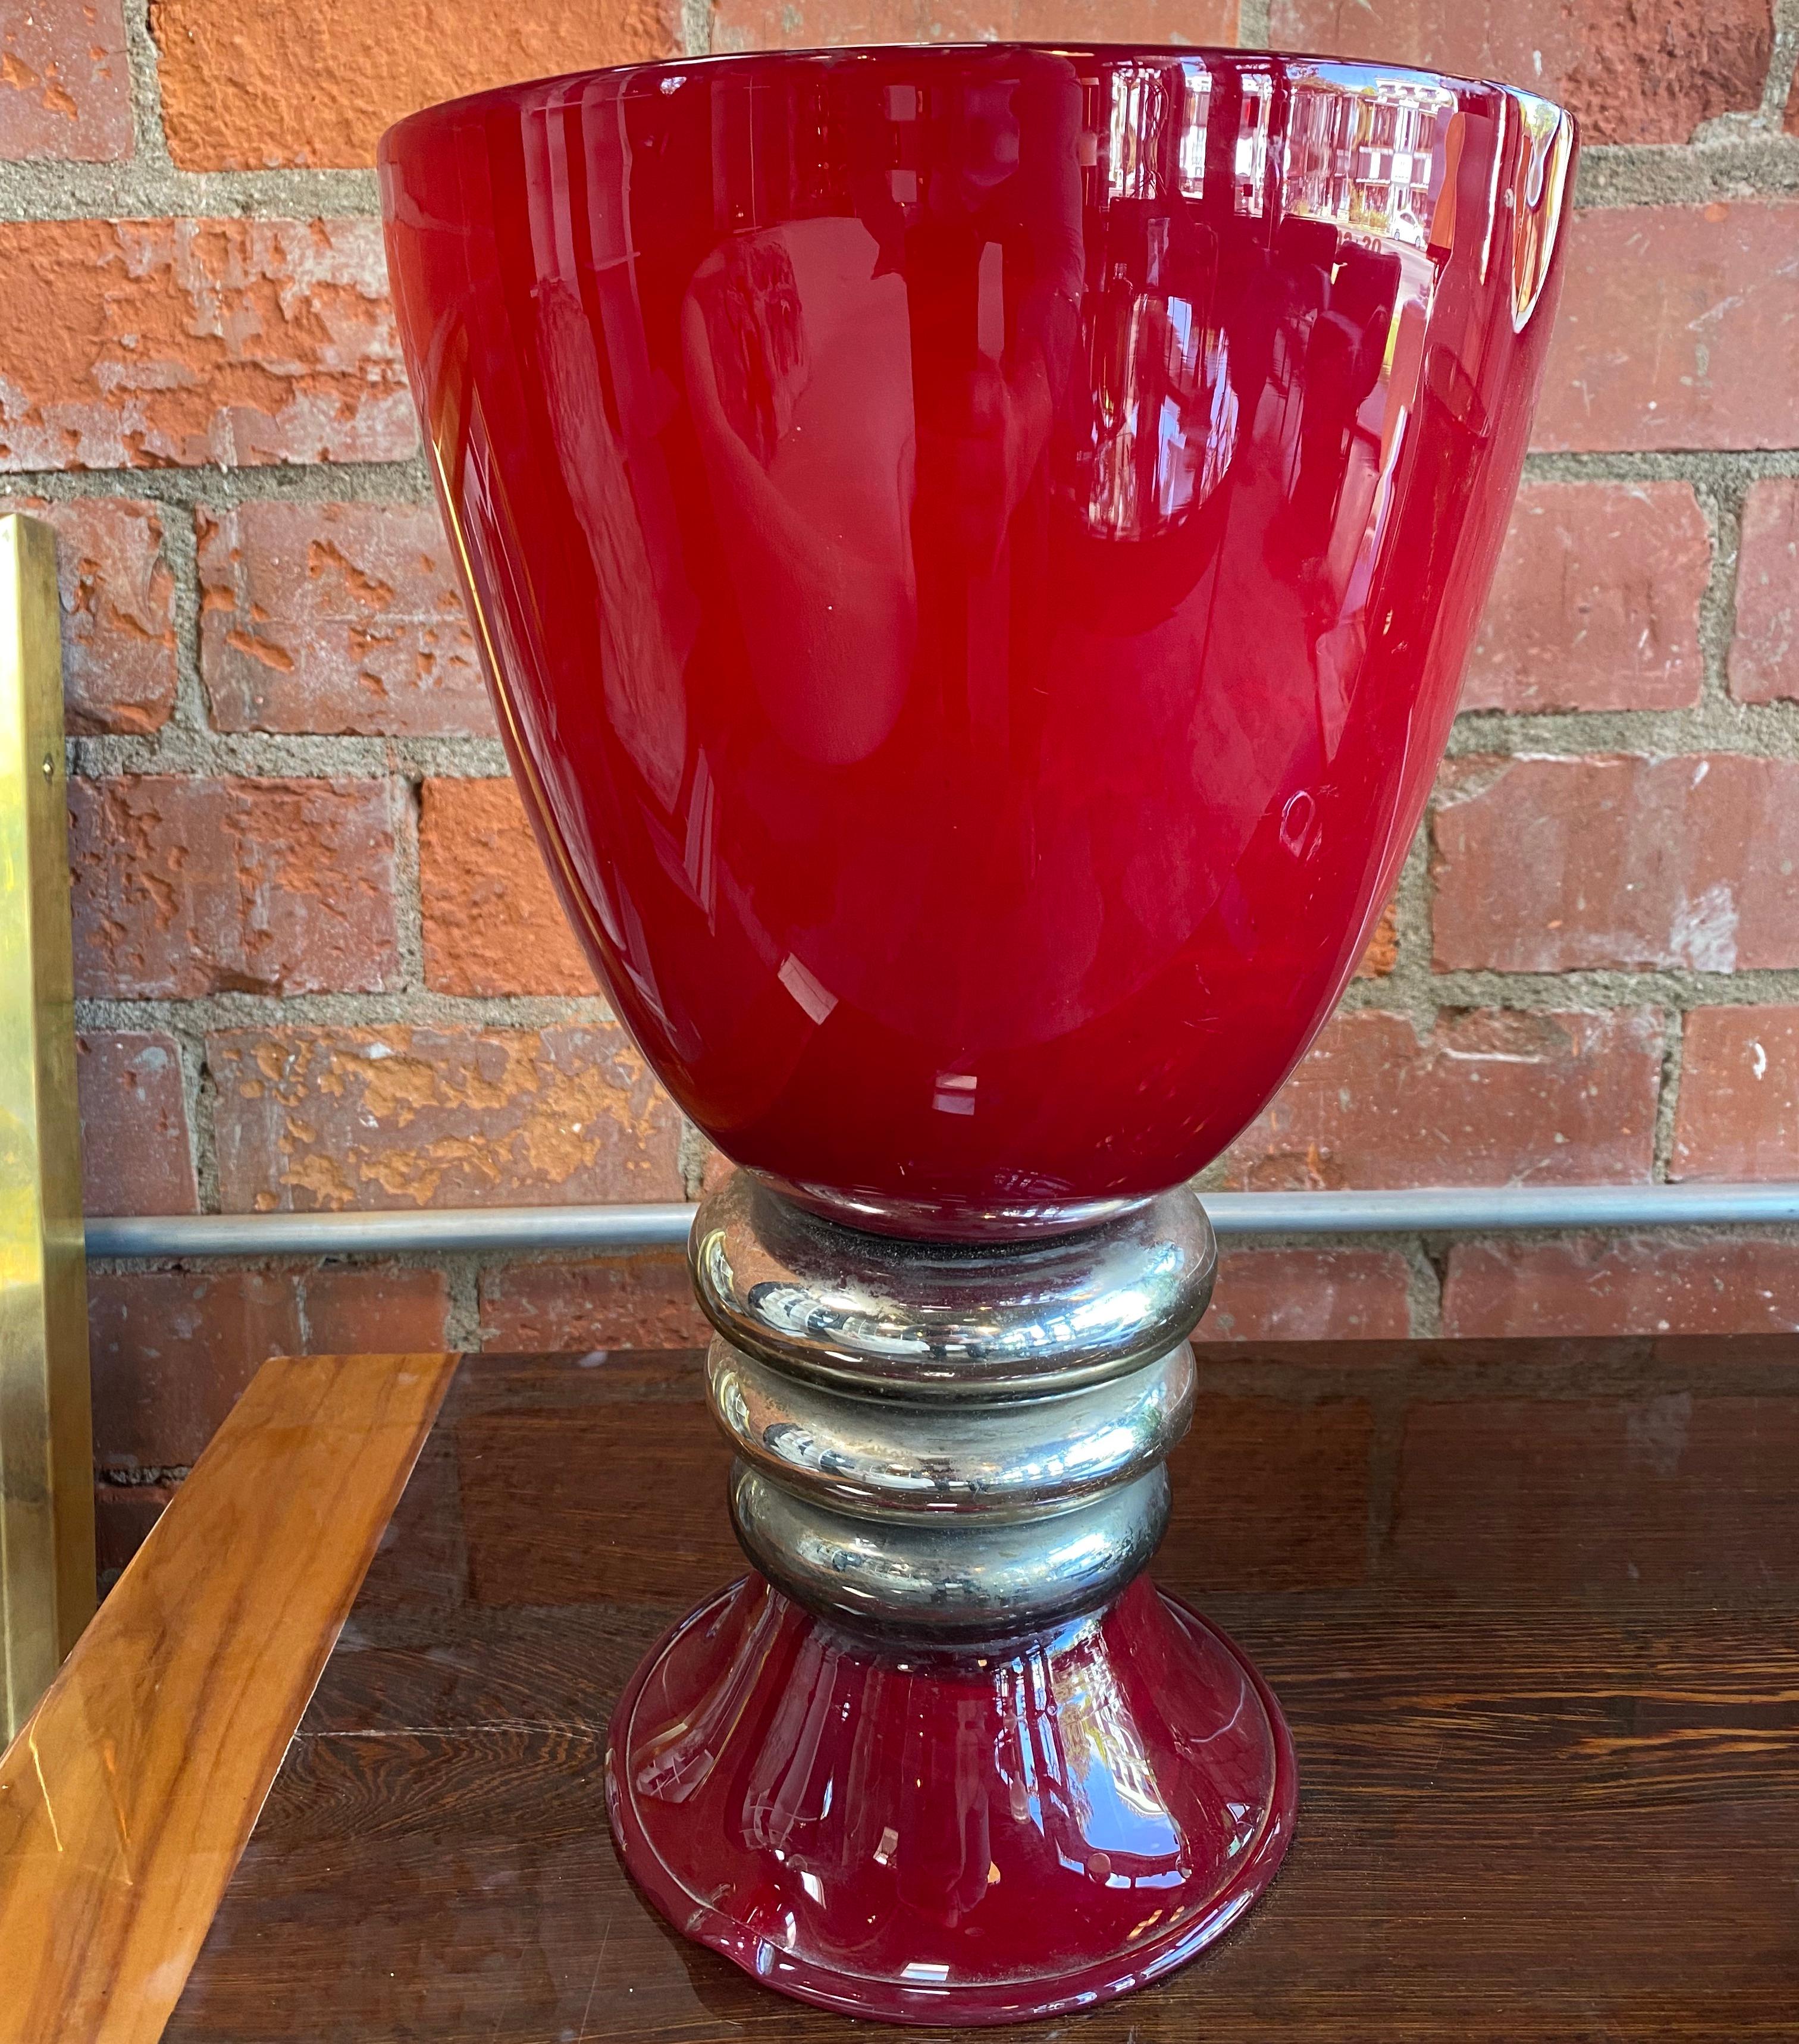 Beautiful Italian red table lamp made with red mirrored barrel made and gold salts.
The table lamp is a stunning piece with an incredible shape.
An elegant and simple item that will complete a midcentury living room or study.